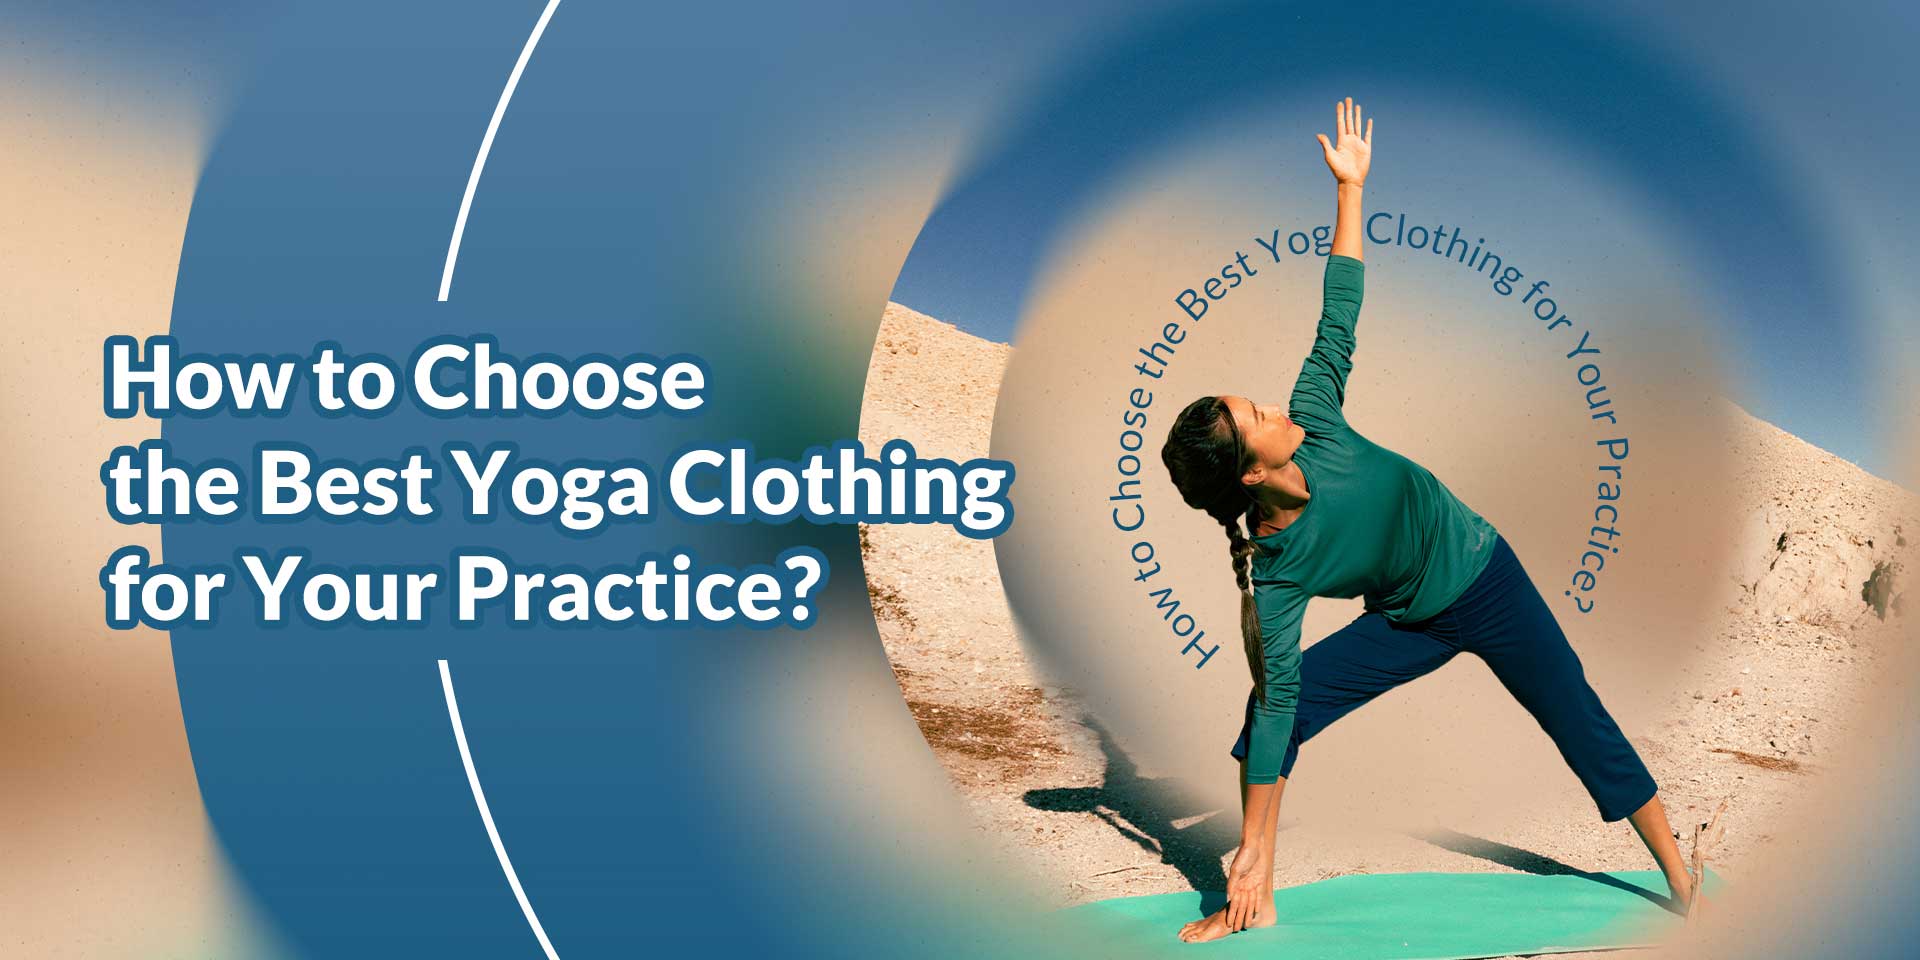 How to Choose the Best Yoga Clothing for Your Practice?